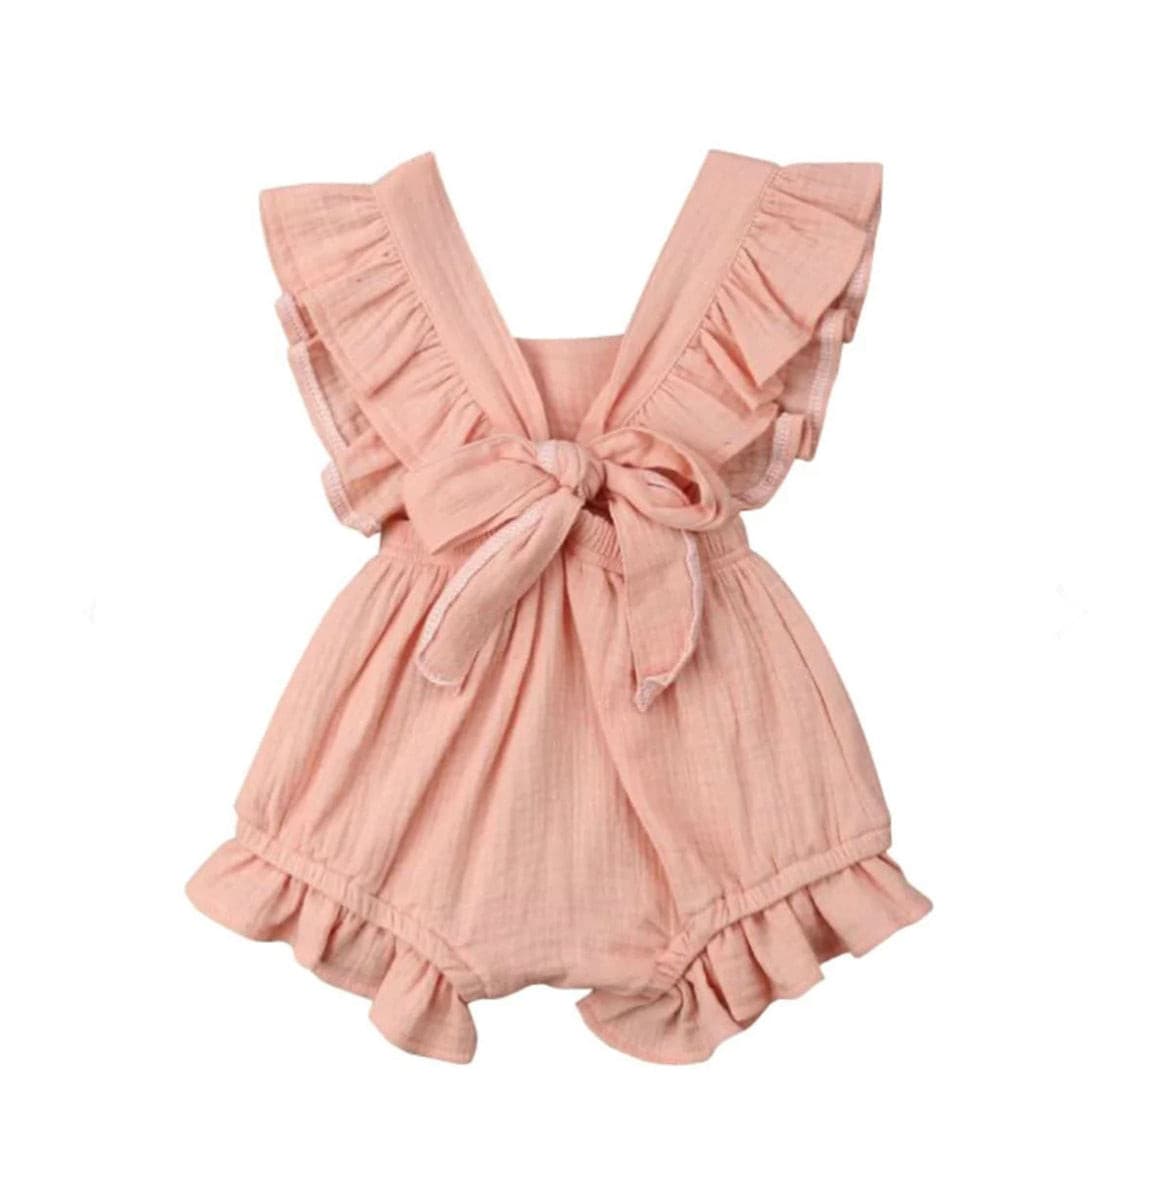 Lilly- Cotton Muslin Romper , Pink Apricot.